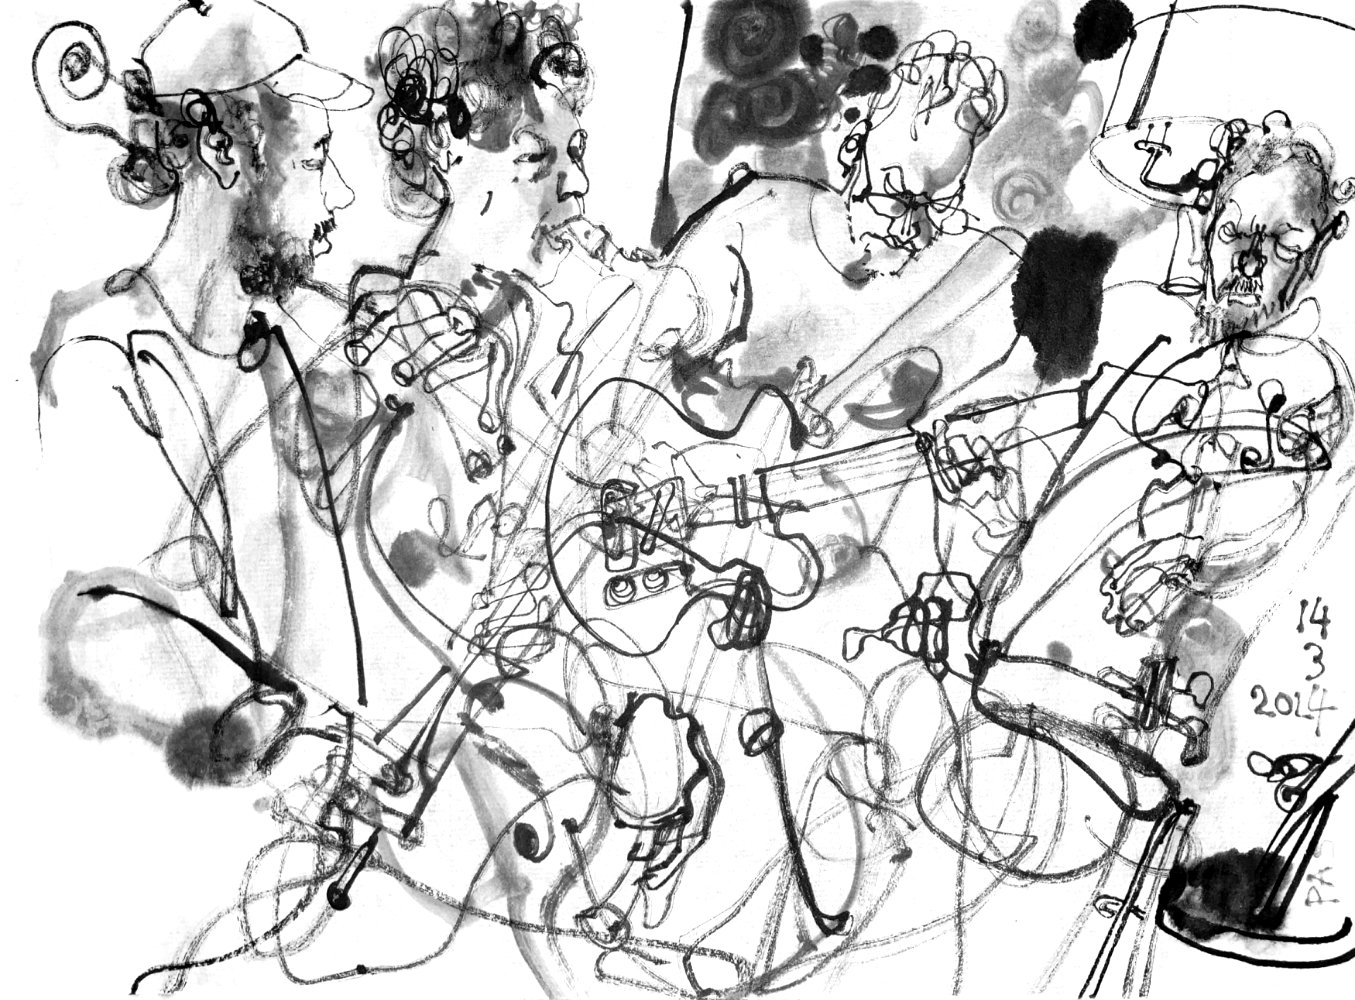 Ink drawing of four male musicians, playing cello, saxophone, guitar and viola